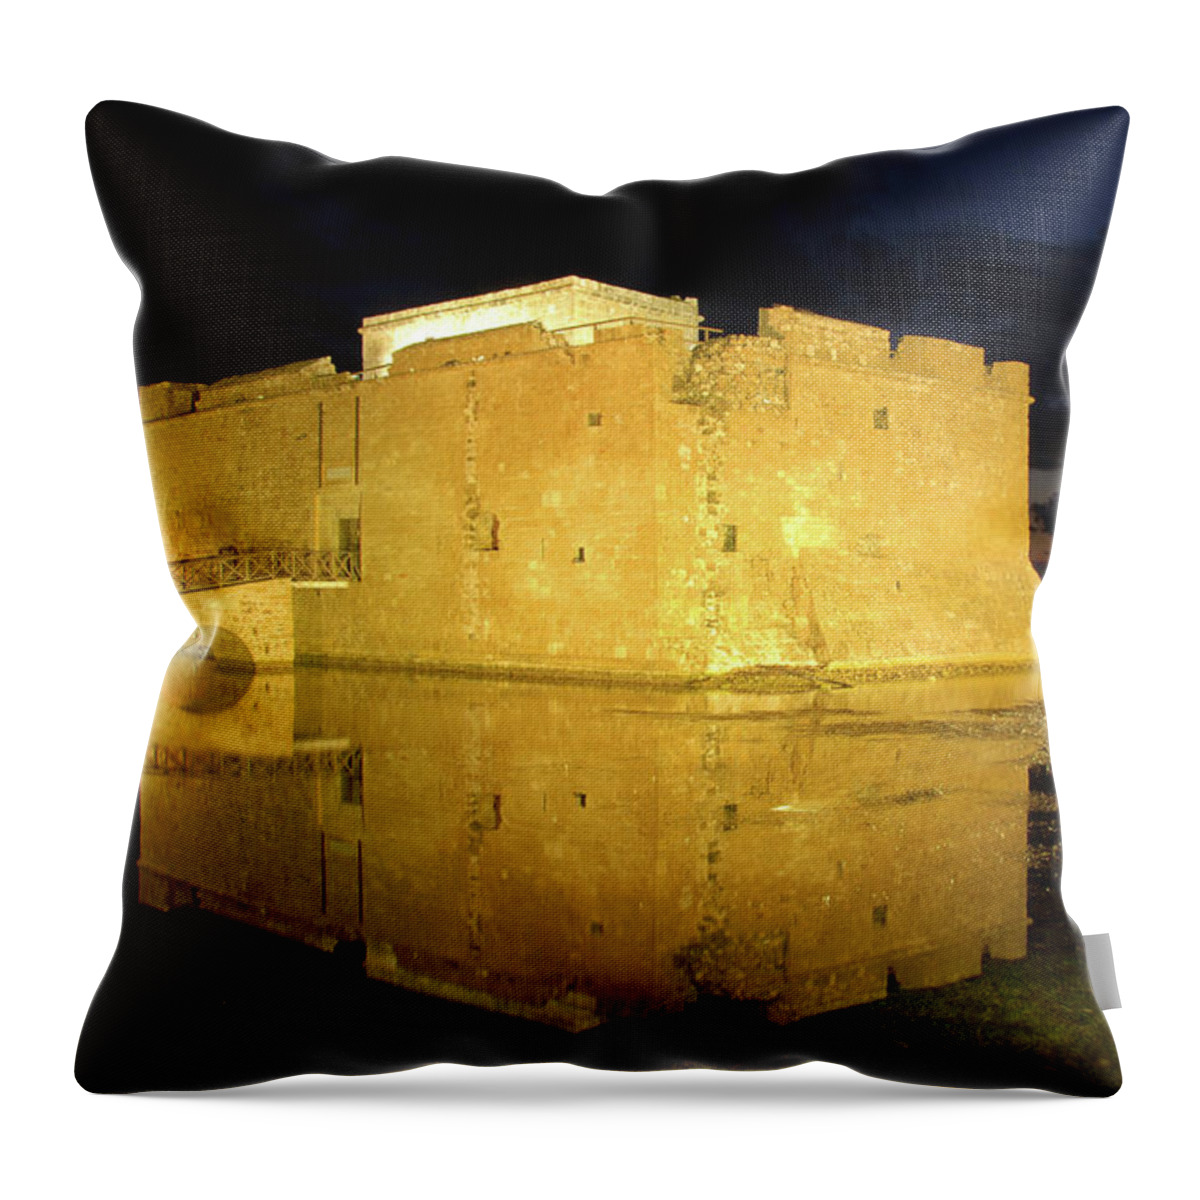 Castle Throw Pillow featuring the photograph Paphos Medieval Castle by Michalakis Ppalis